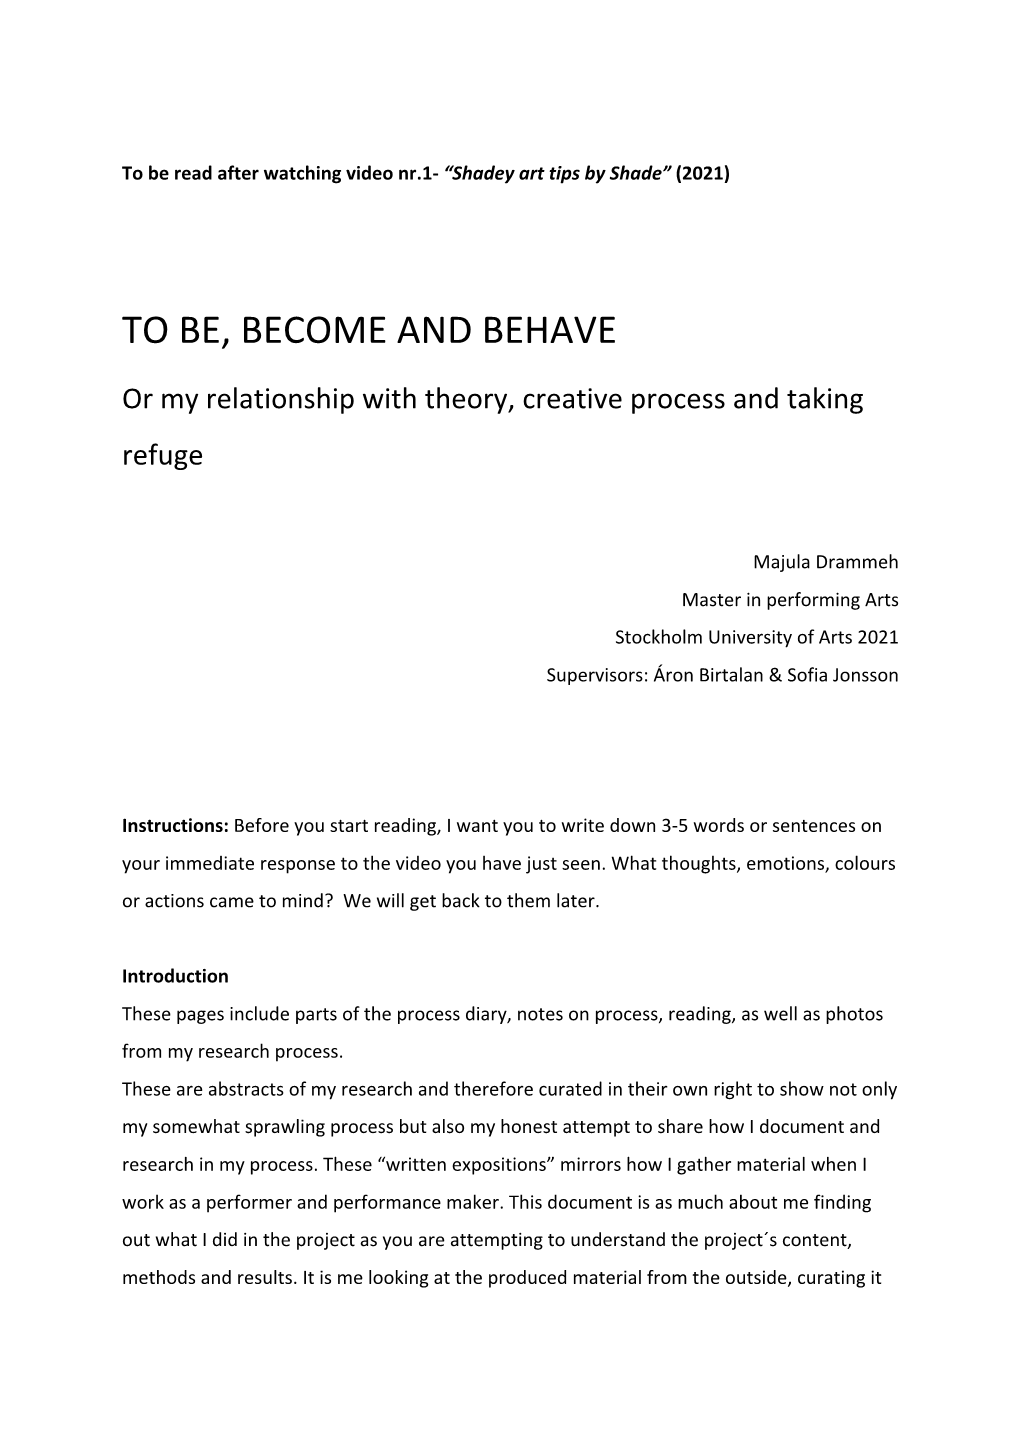 To Be, Become and Behave